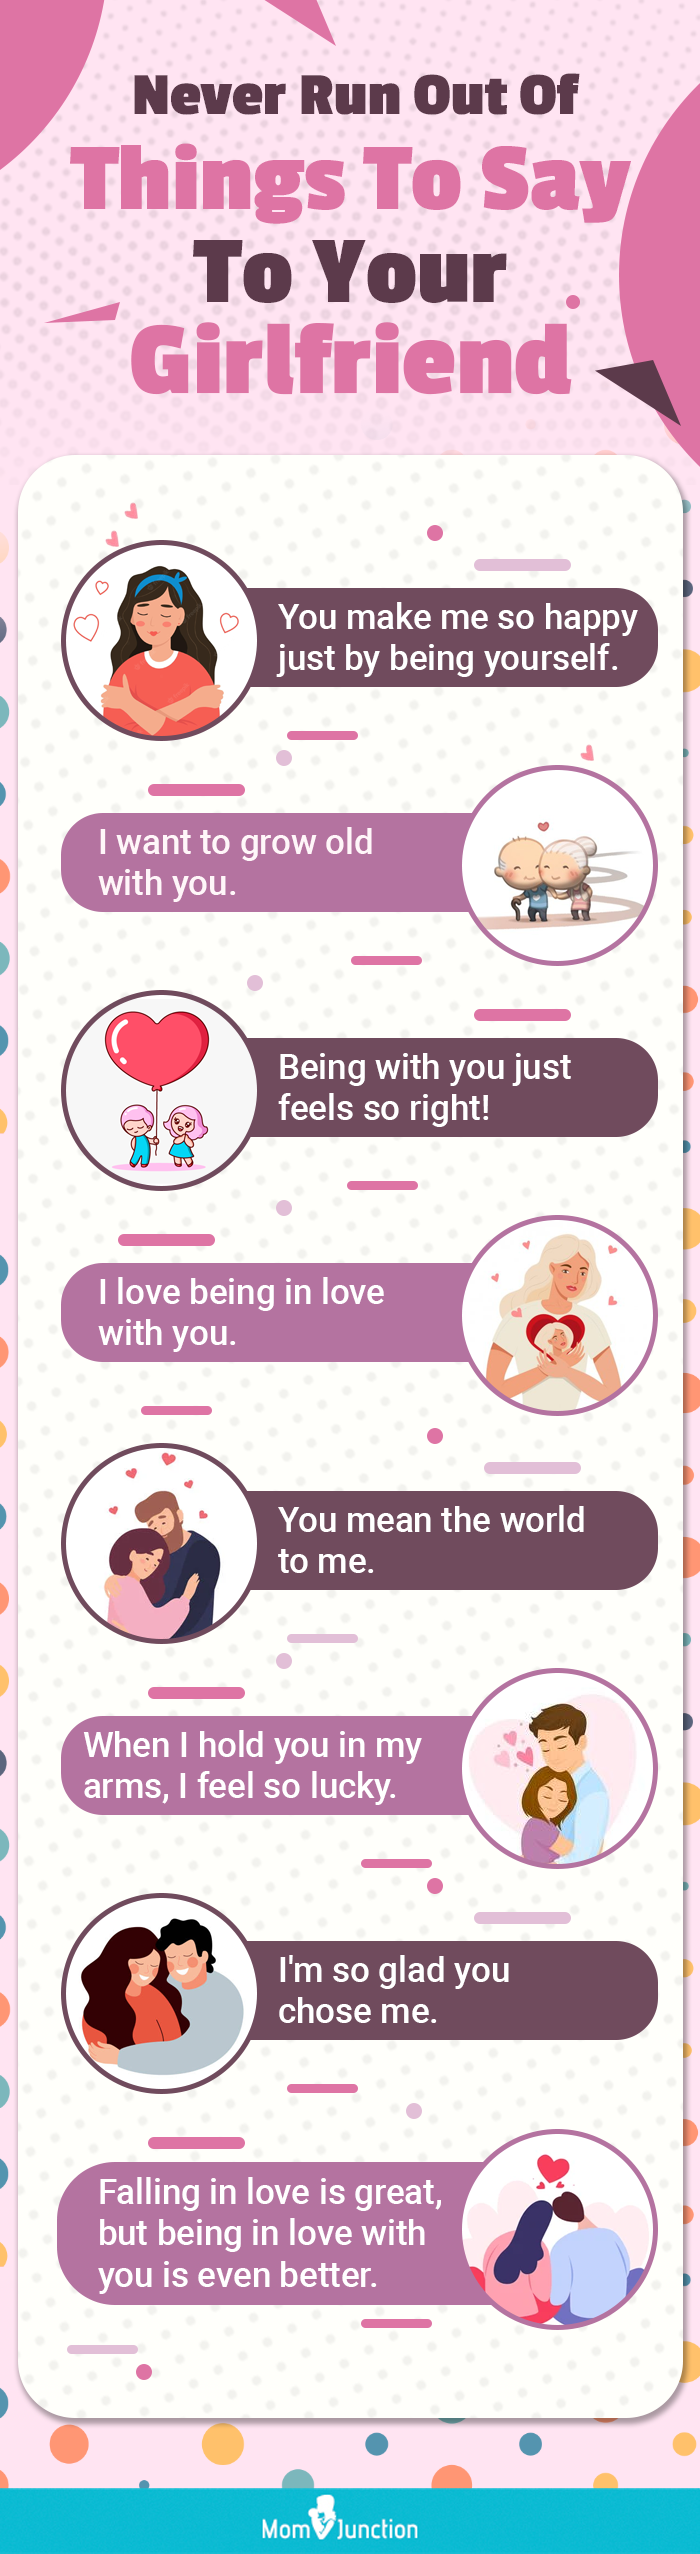 never run out of things to say to your gf (infographic)